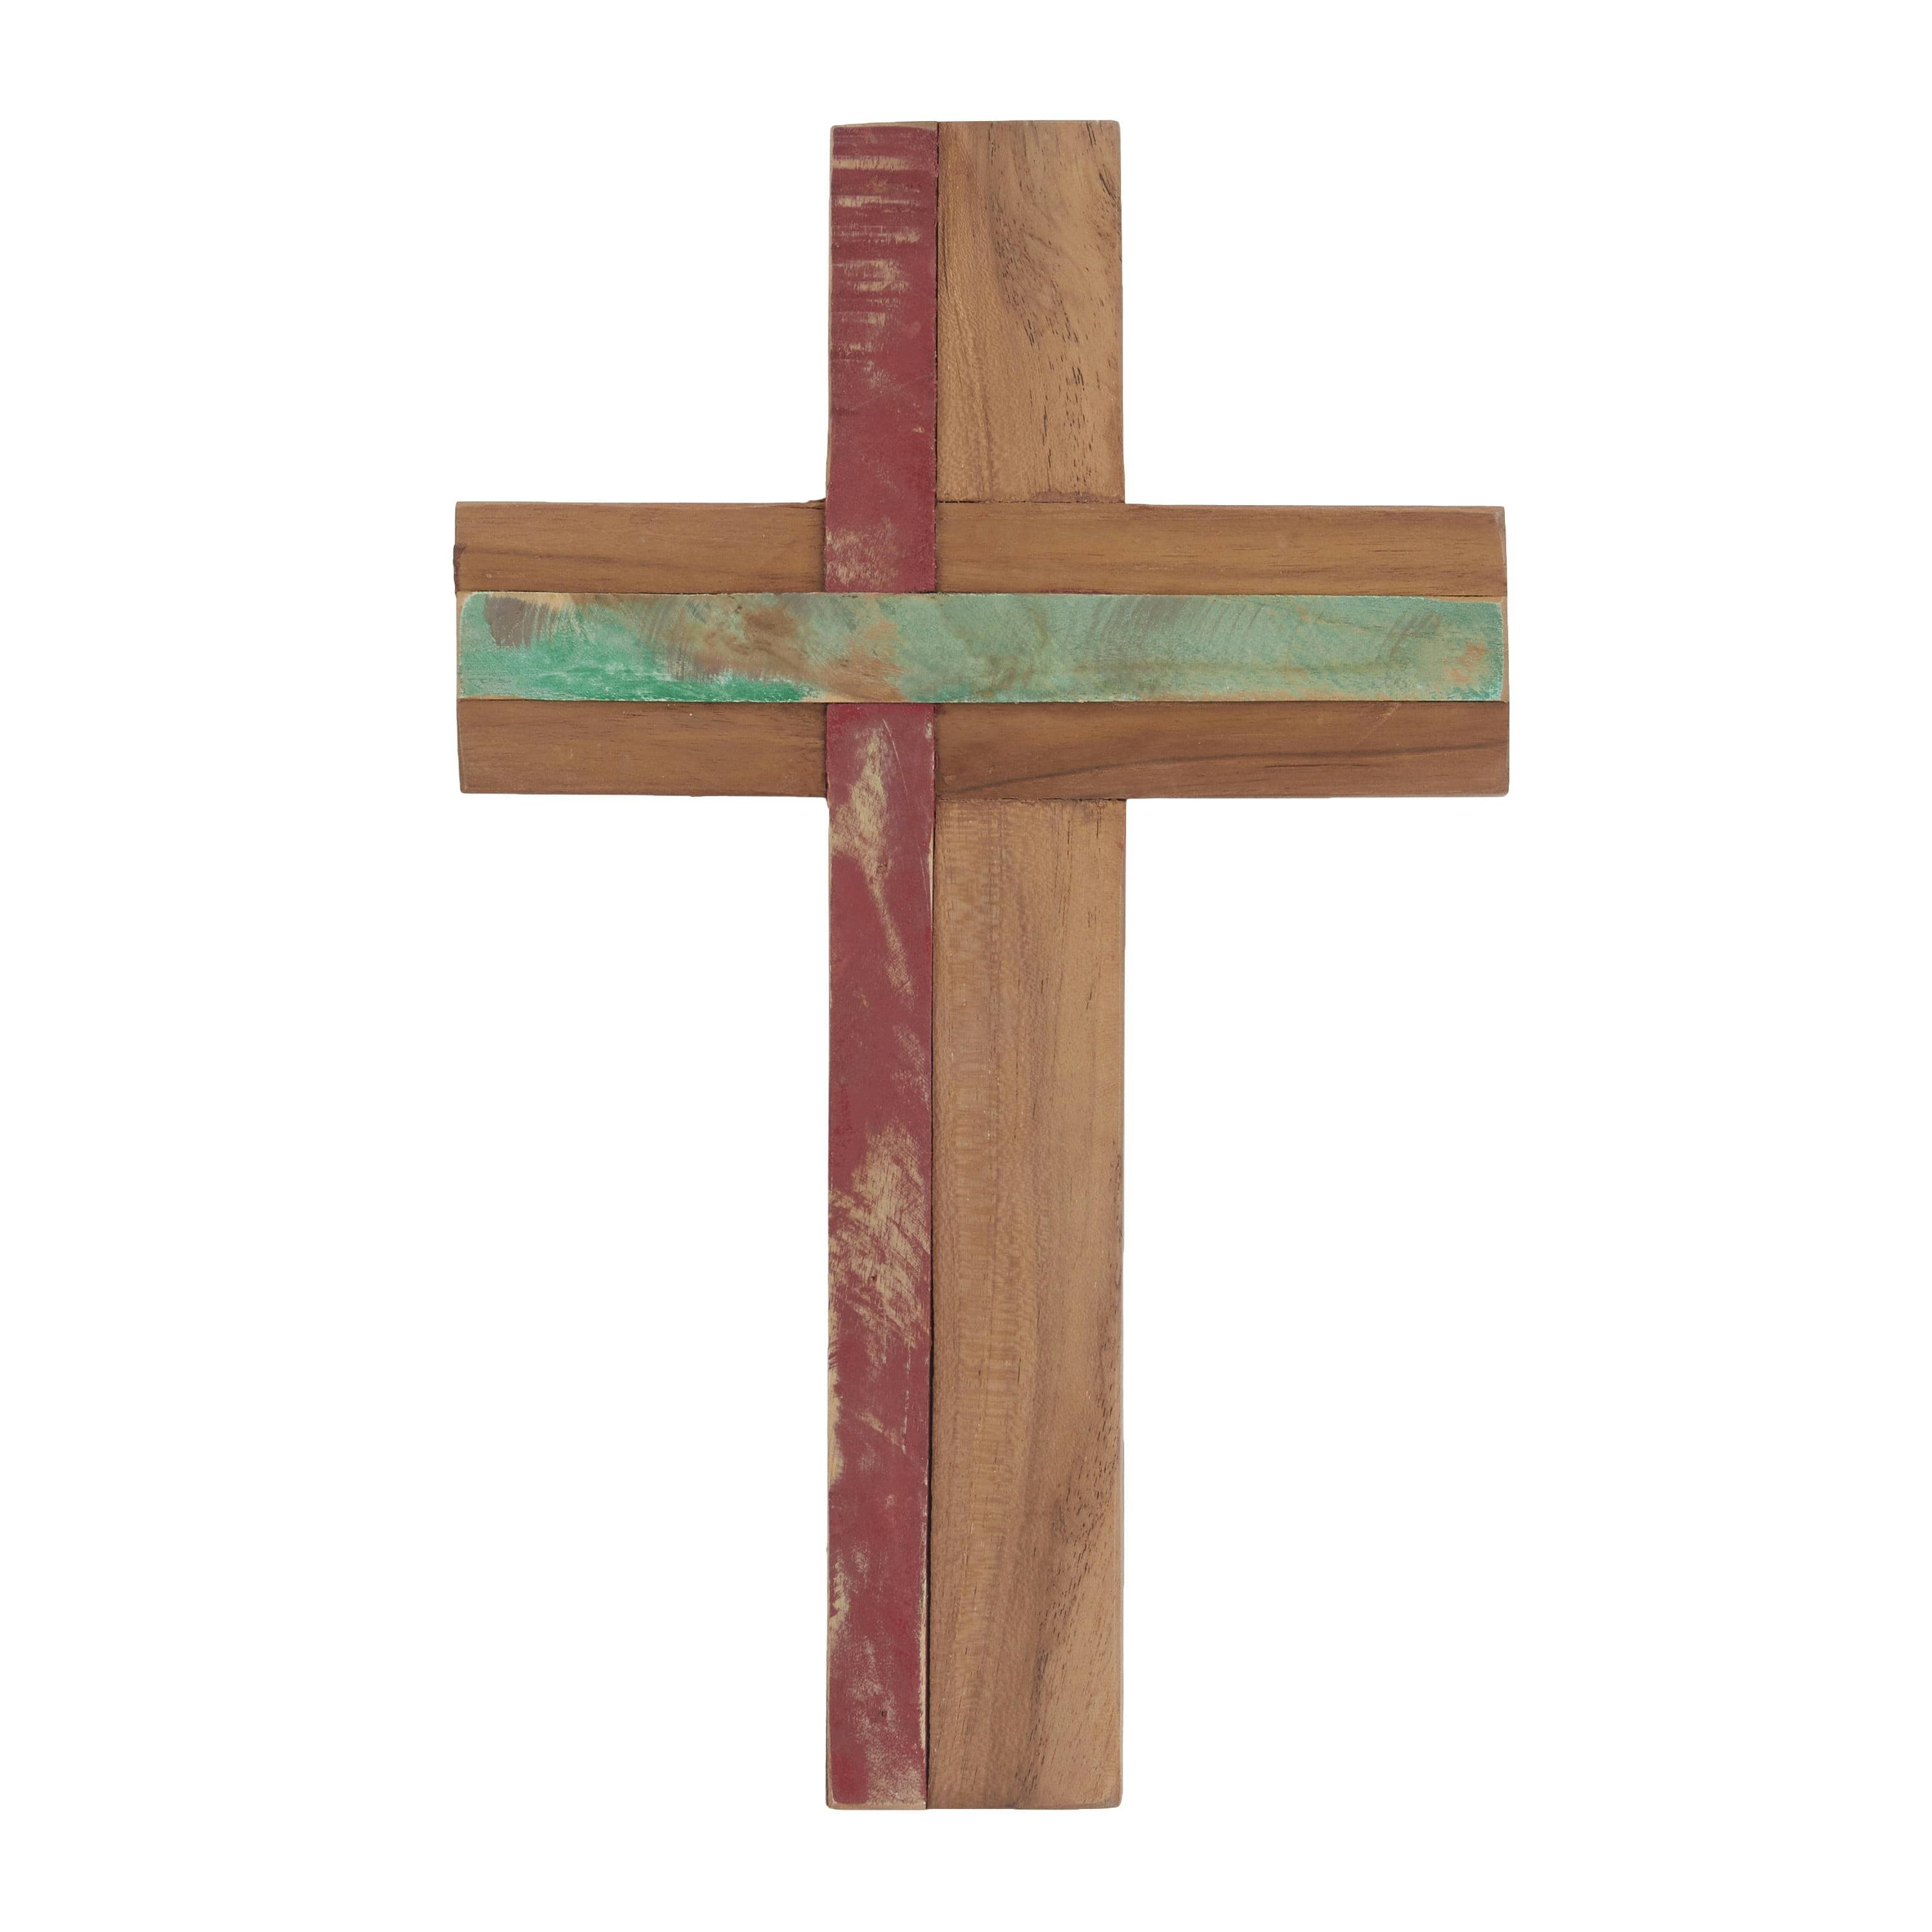 Indonesian Golden Brown and Mocha Wood Cross Statue, 15.85 in